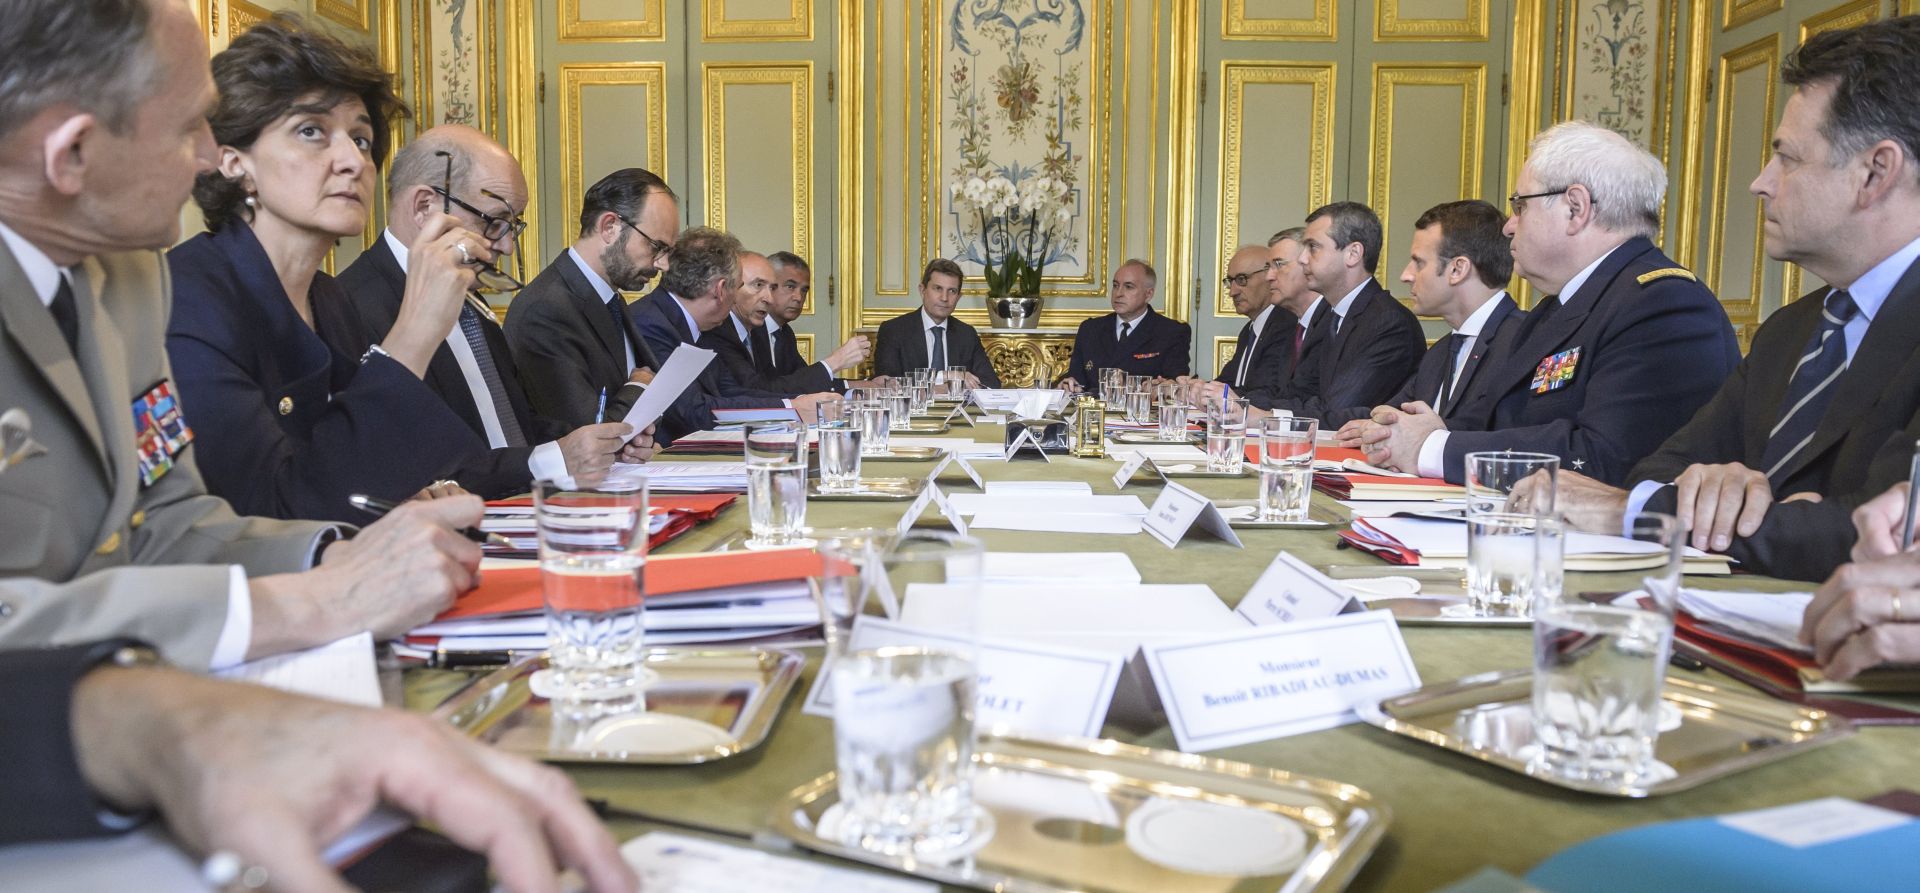 epa05972212 French President Emmanuel Macron (3-R) presides a defence council meeting at the Elysee Palace in Paris, France, 18 May 2017. Others are not identified.  EPA/Christophe Petit Tesson / POOL MAXPPP OUT